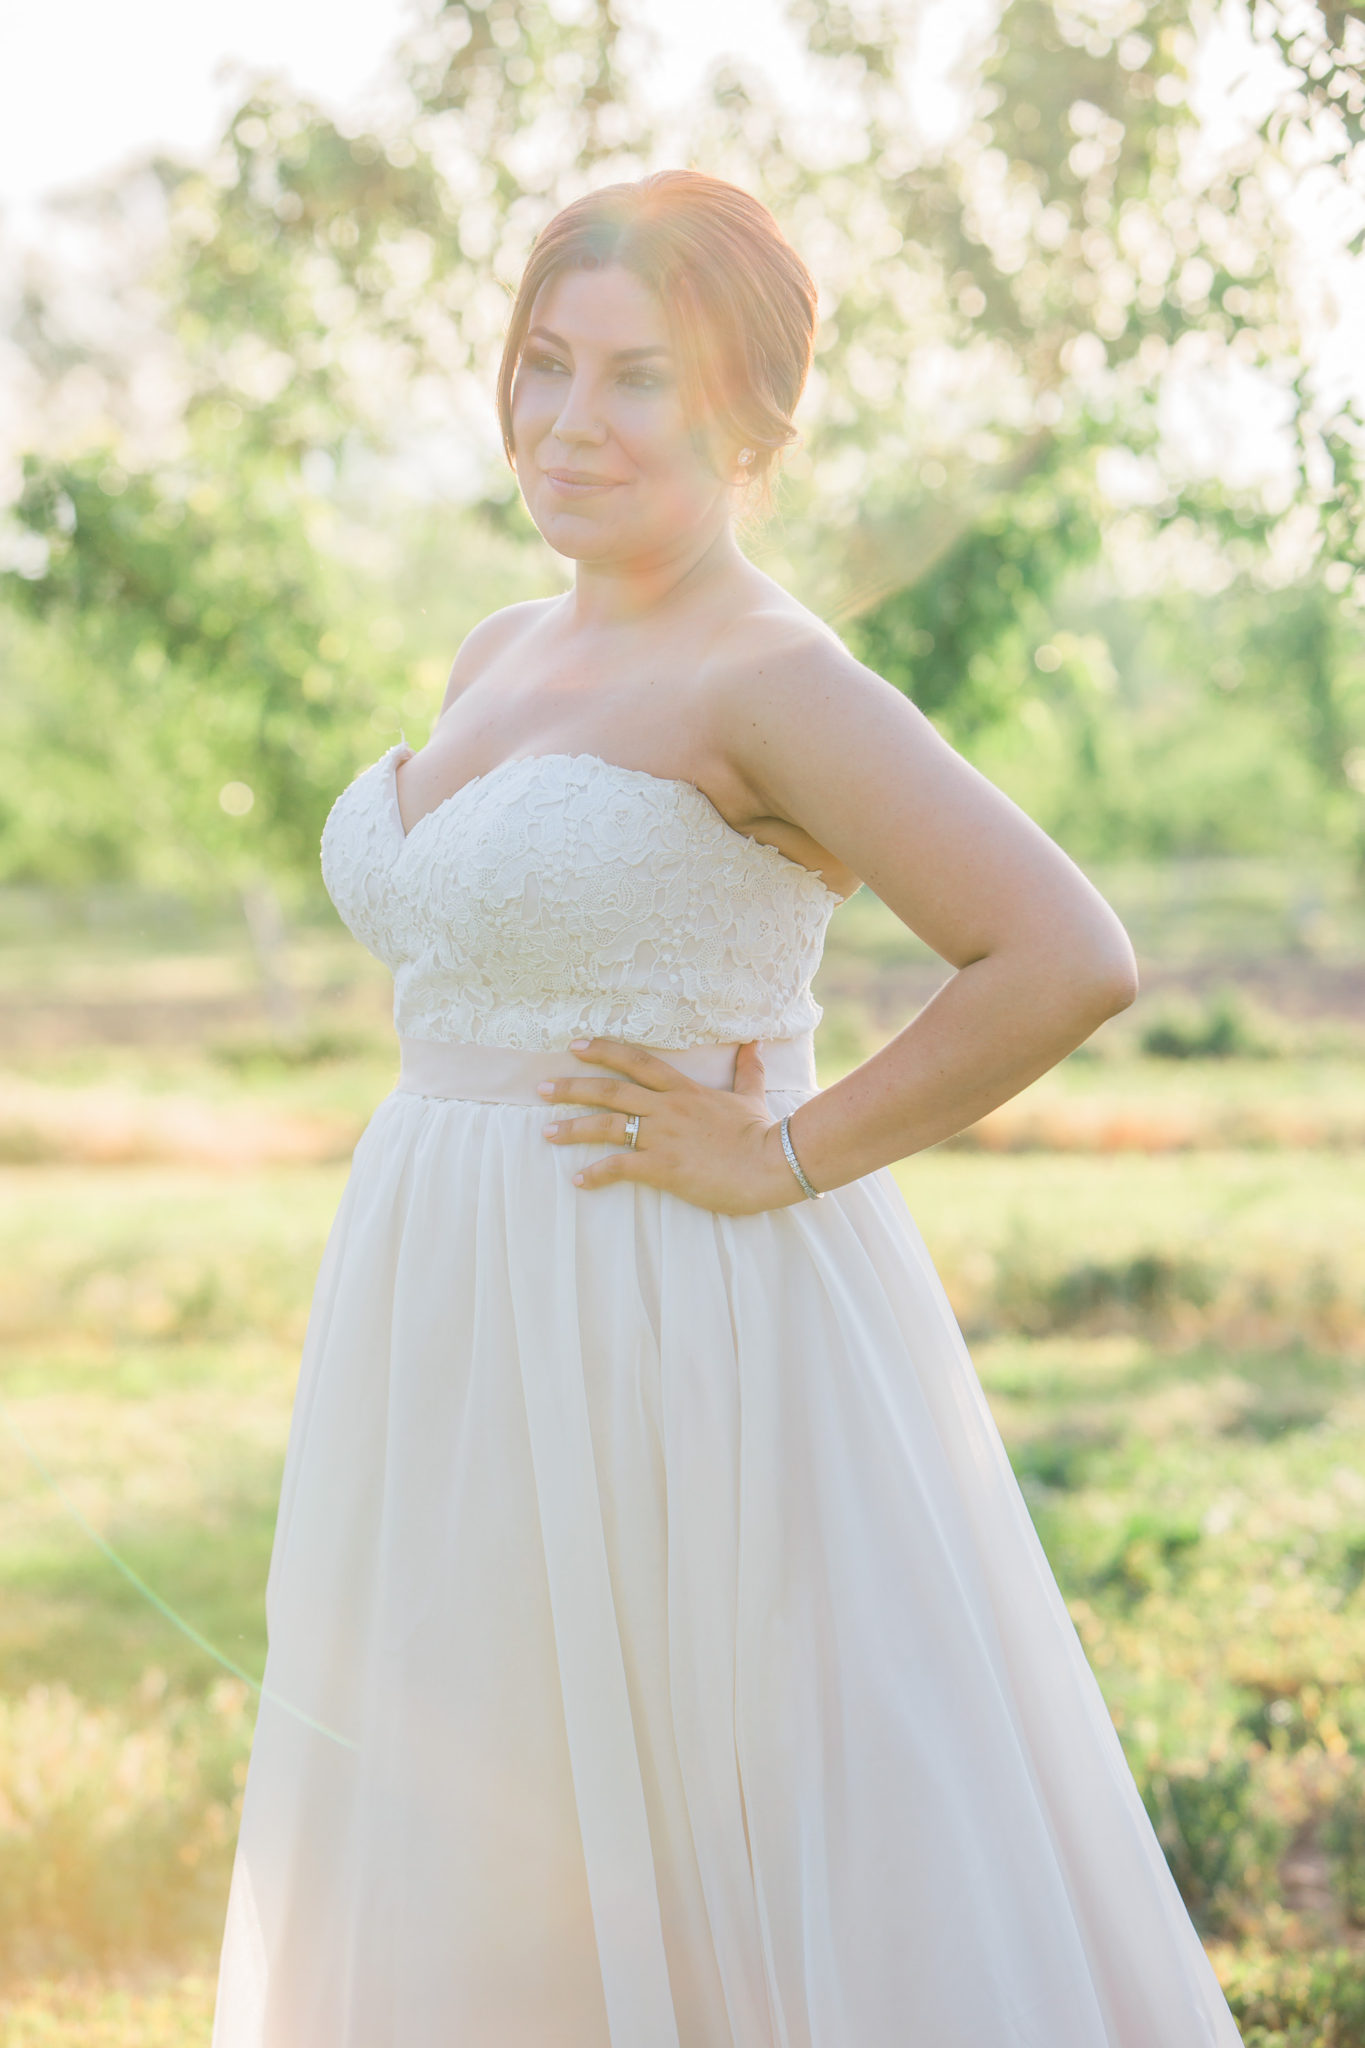 REAL WEDDING | Intimate Rustic Vintage Wedding in Ontario | Samantha Ong Photography | Pretty Pear Bride